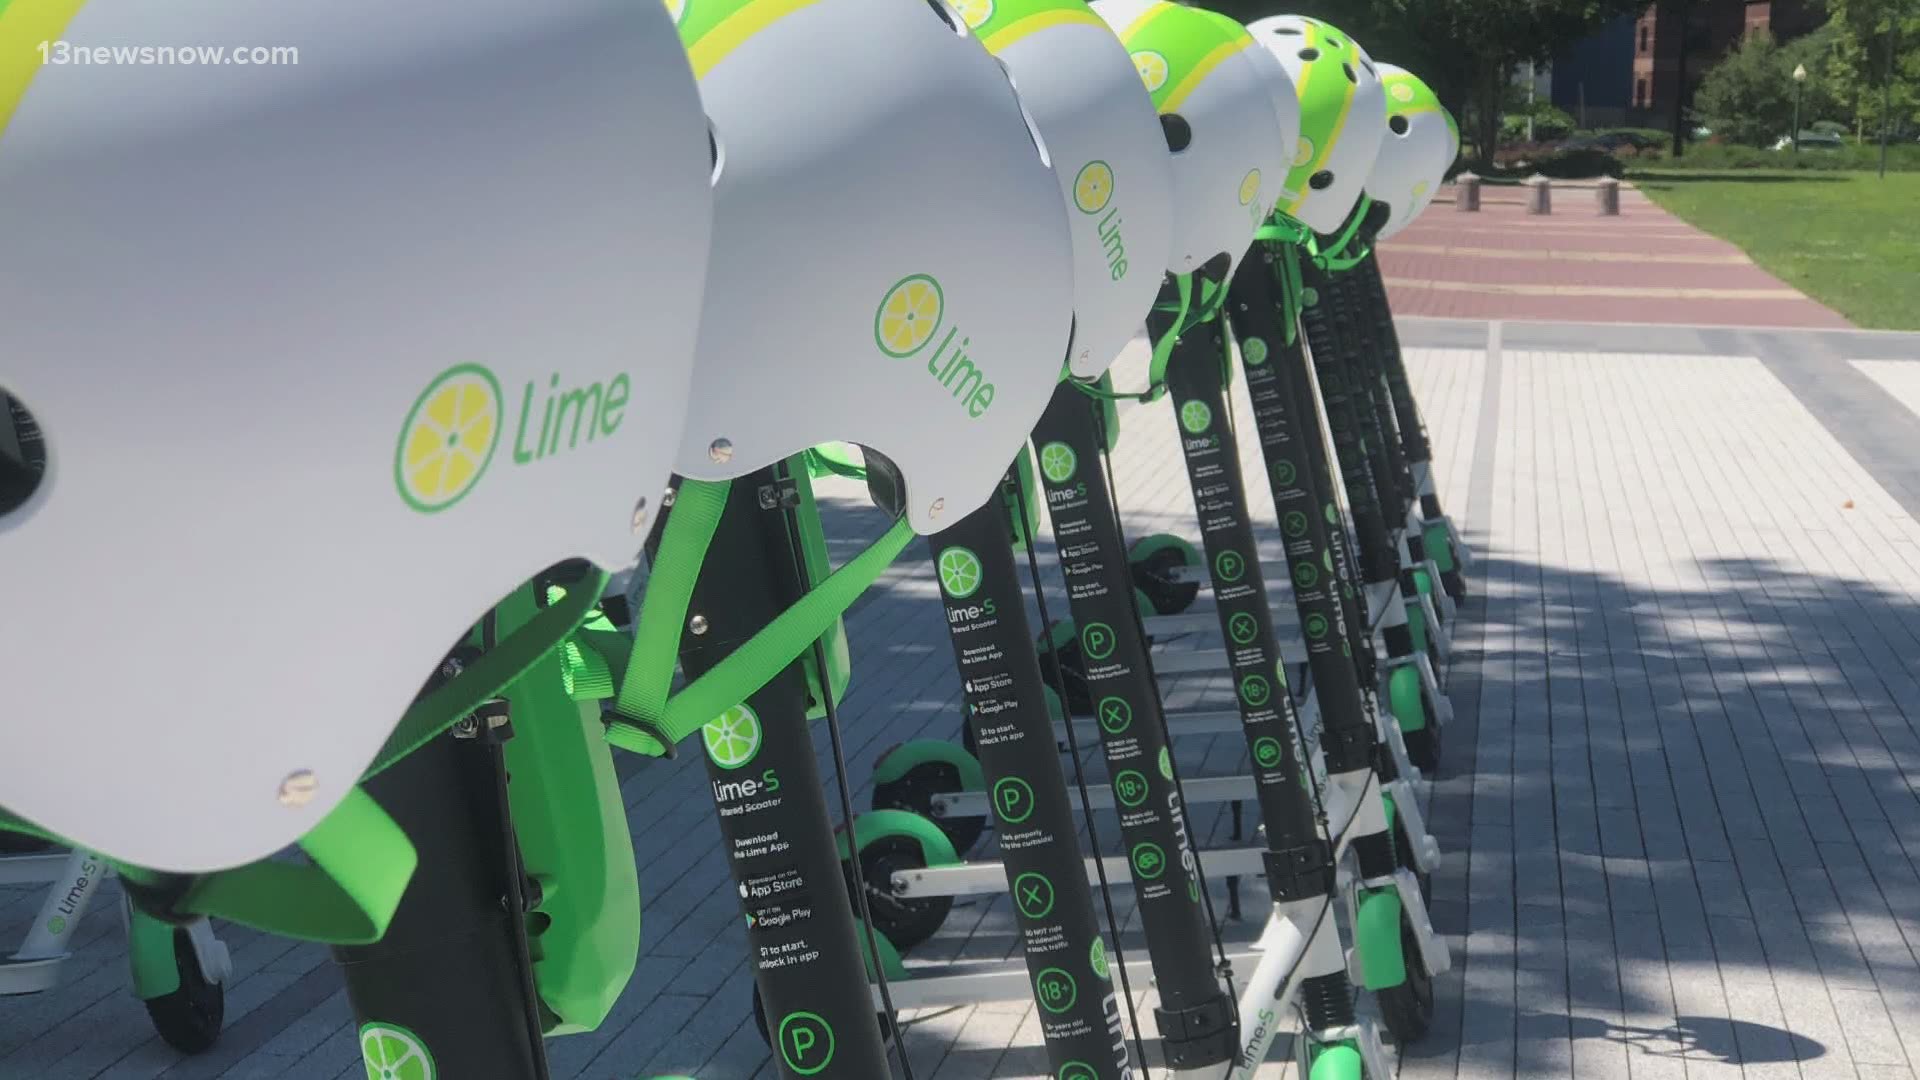 Lime scooters coming to Norfolk streets | 13newsnow.com